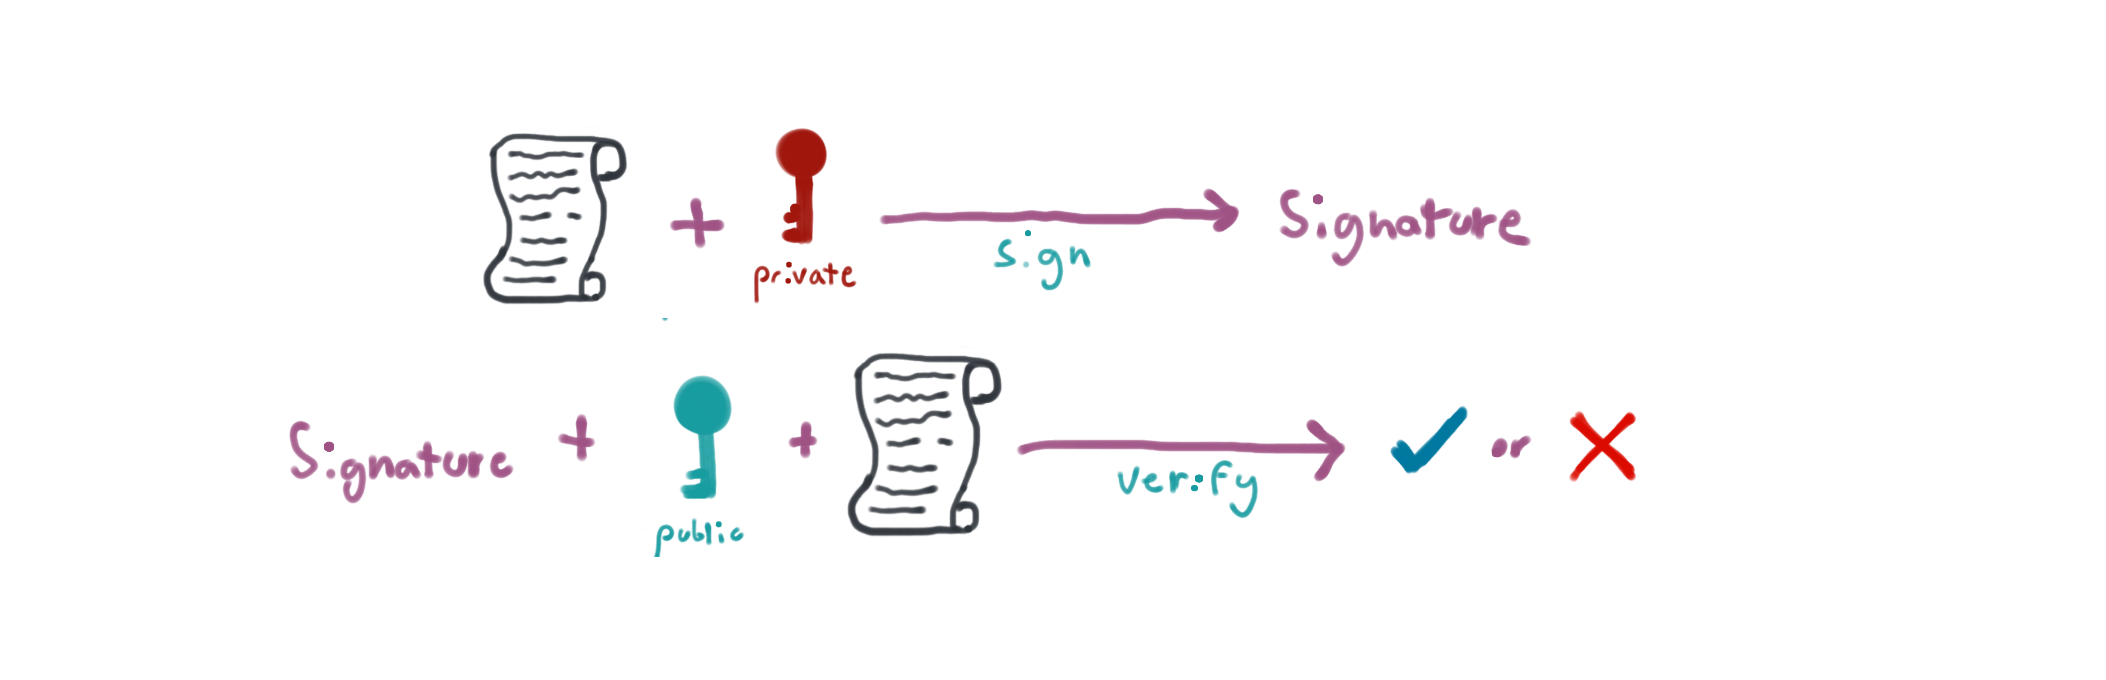 Illustration of using a private key to sign and a public key to verify